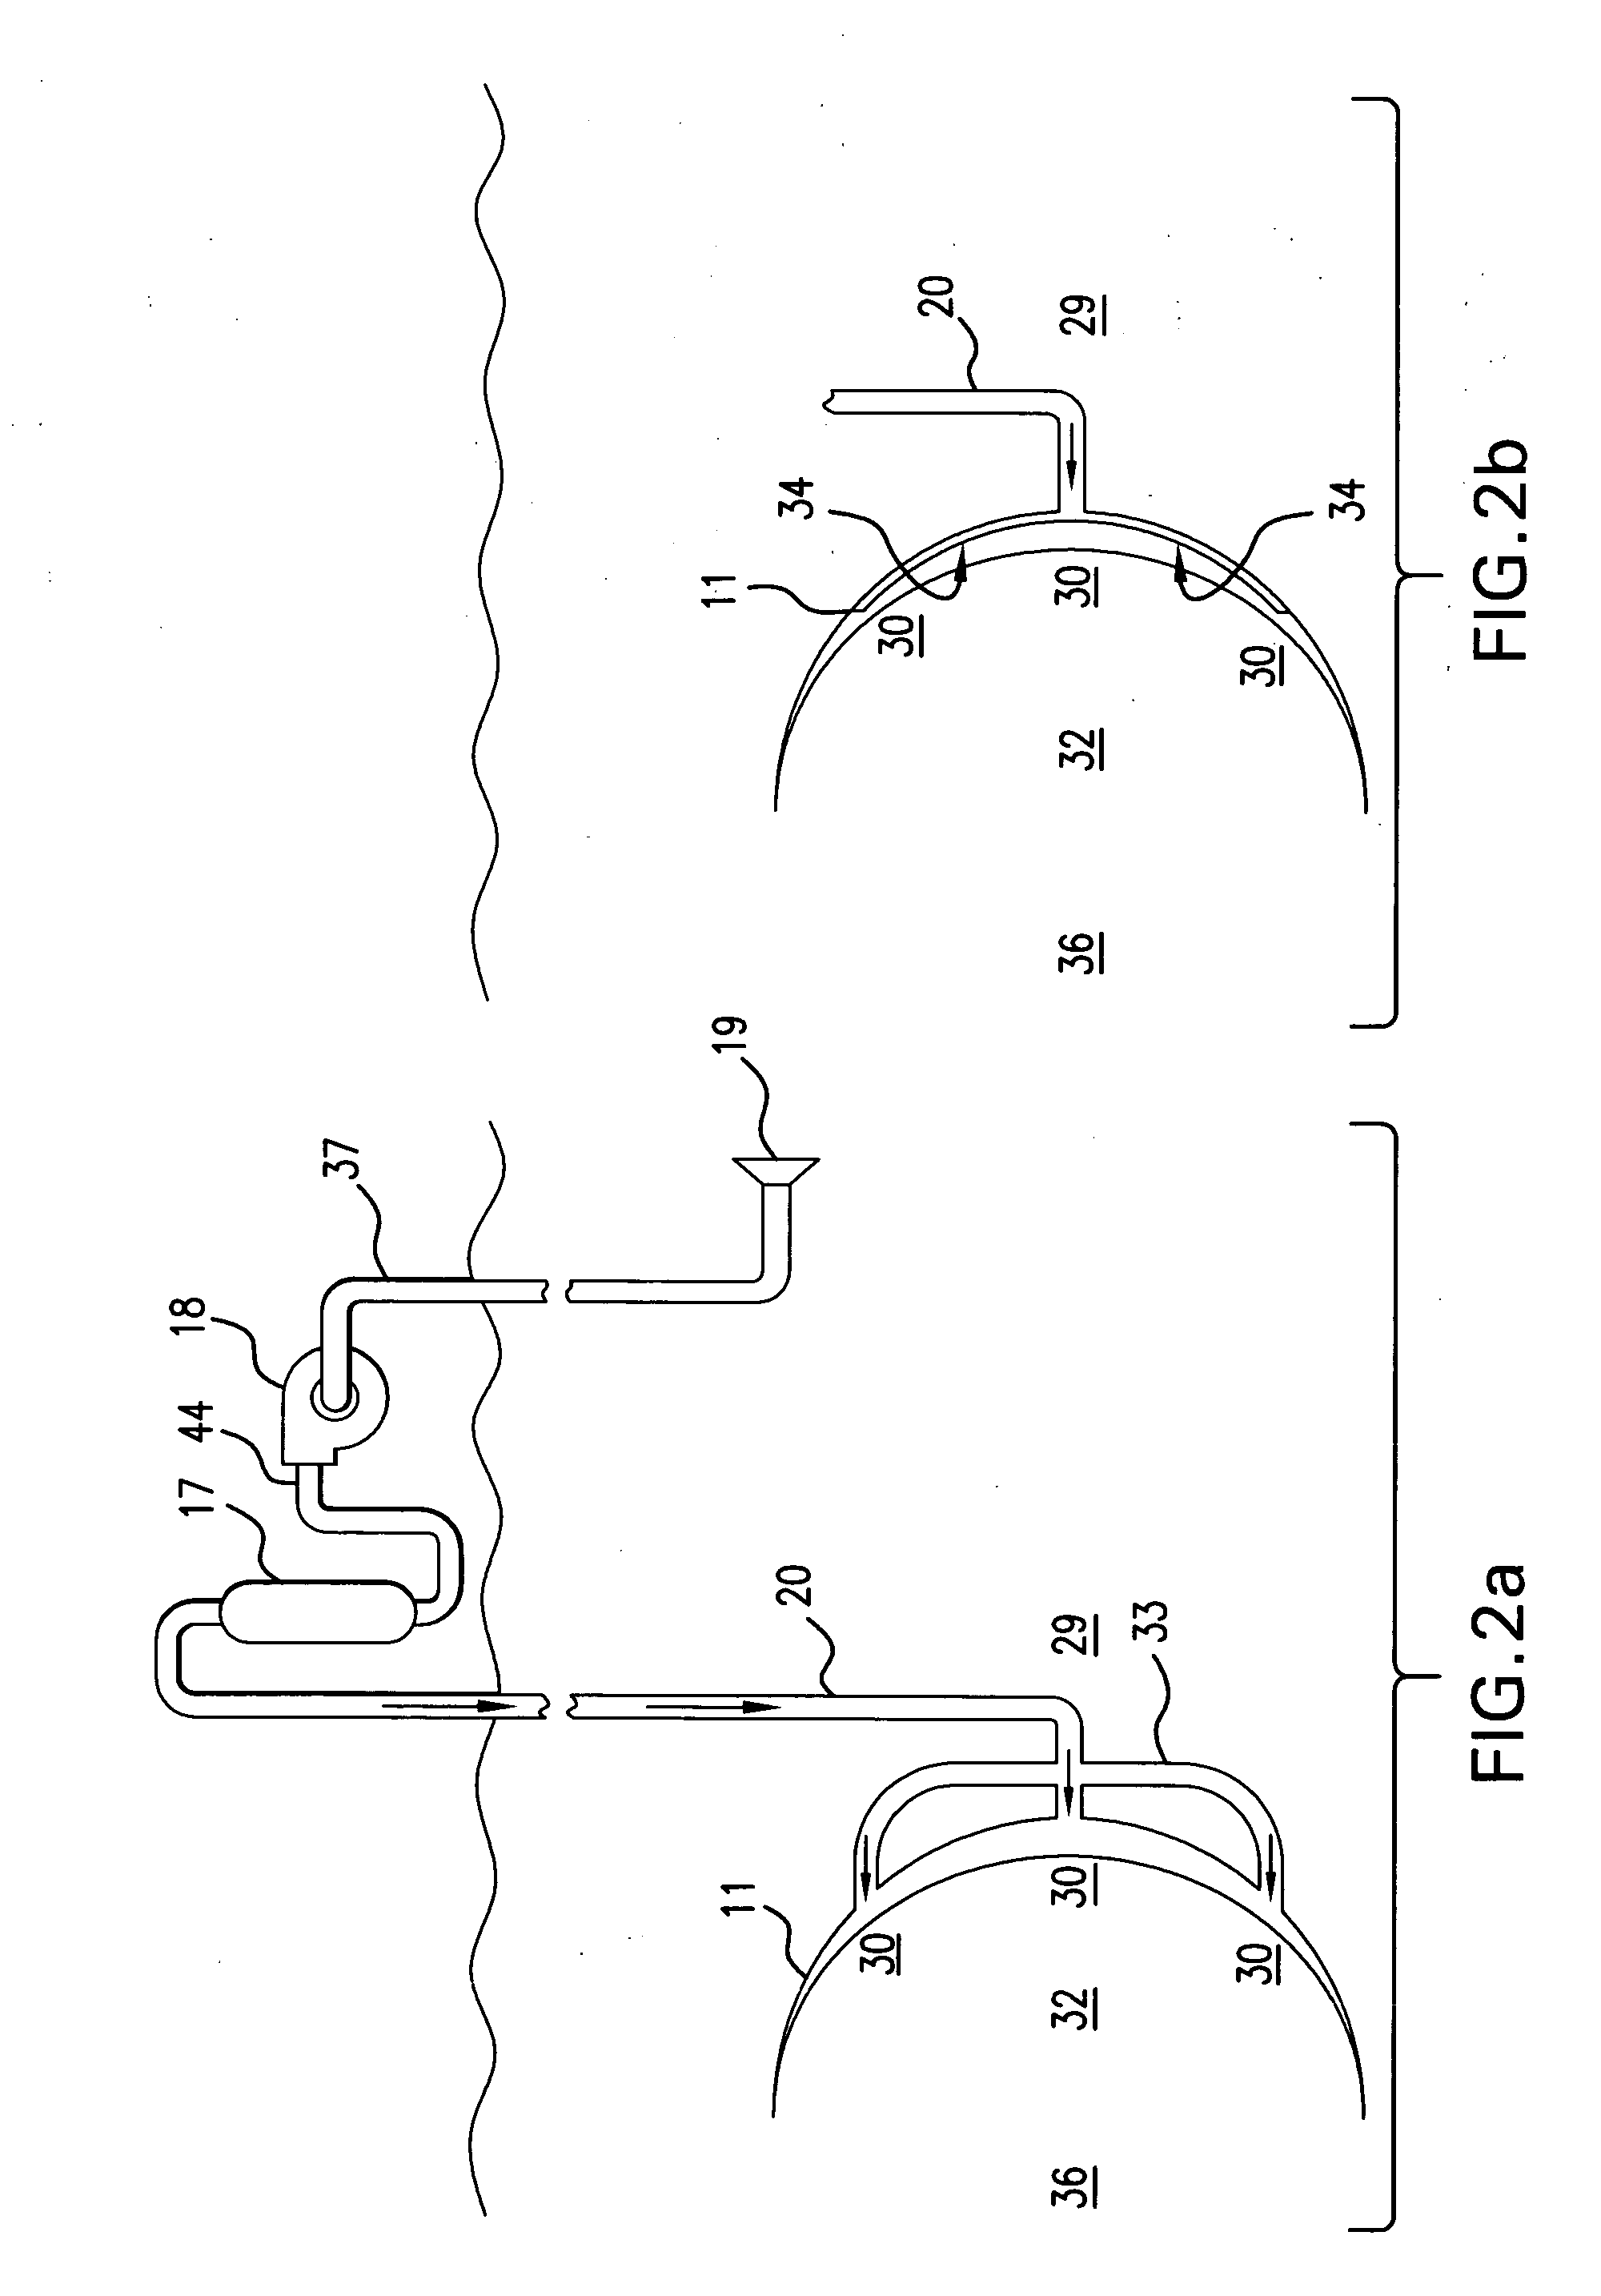 Fluid injection deflector shield viewing apparatus and method